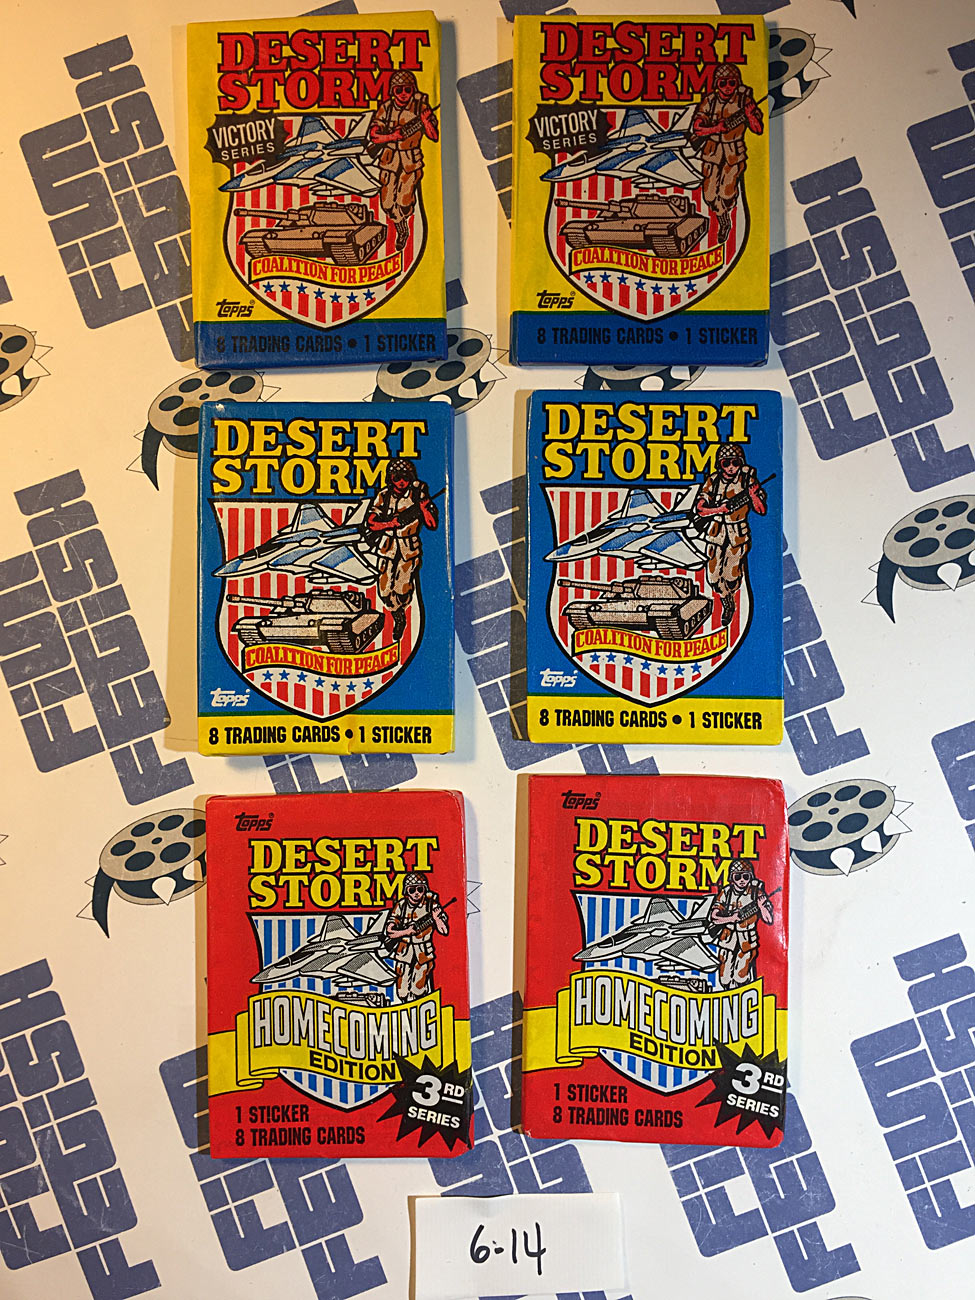 Set of 6 Sealed Topps Desert Storm Trading Card Wax Packs, Homecoming, Coalition For Peace, Victory Series [614]